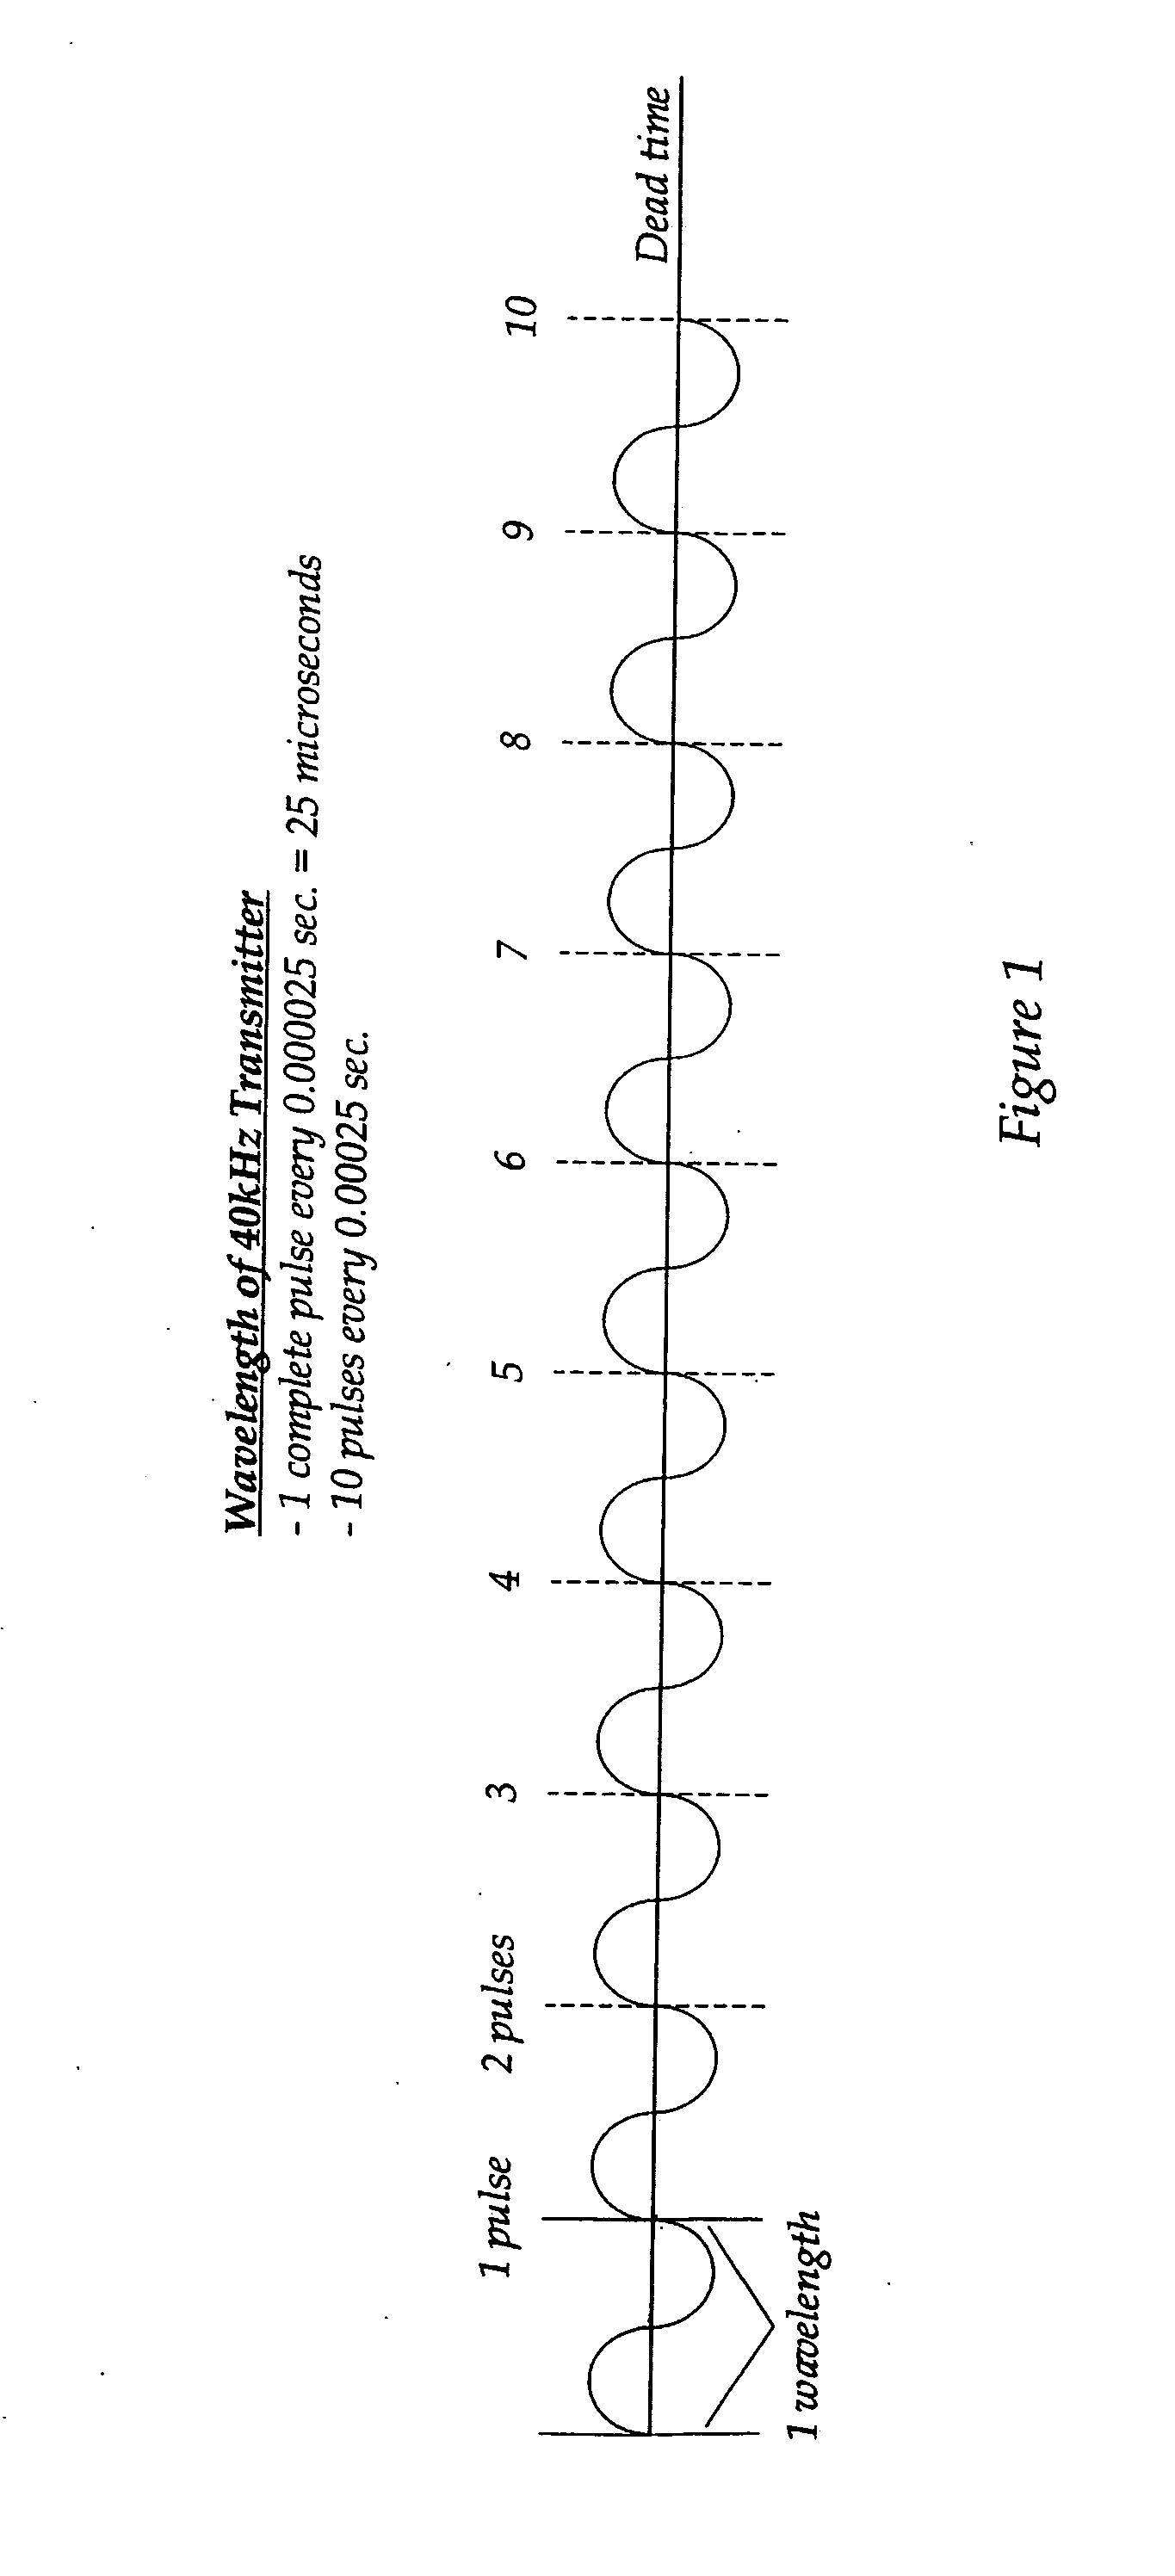 Frequency matched relative position tracking system